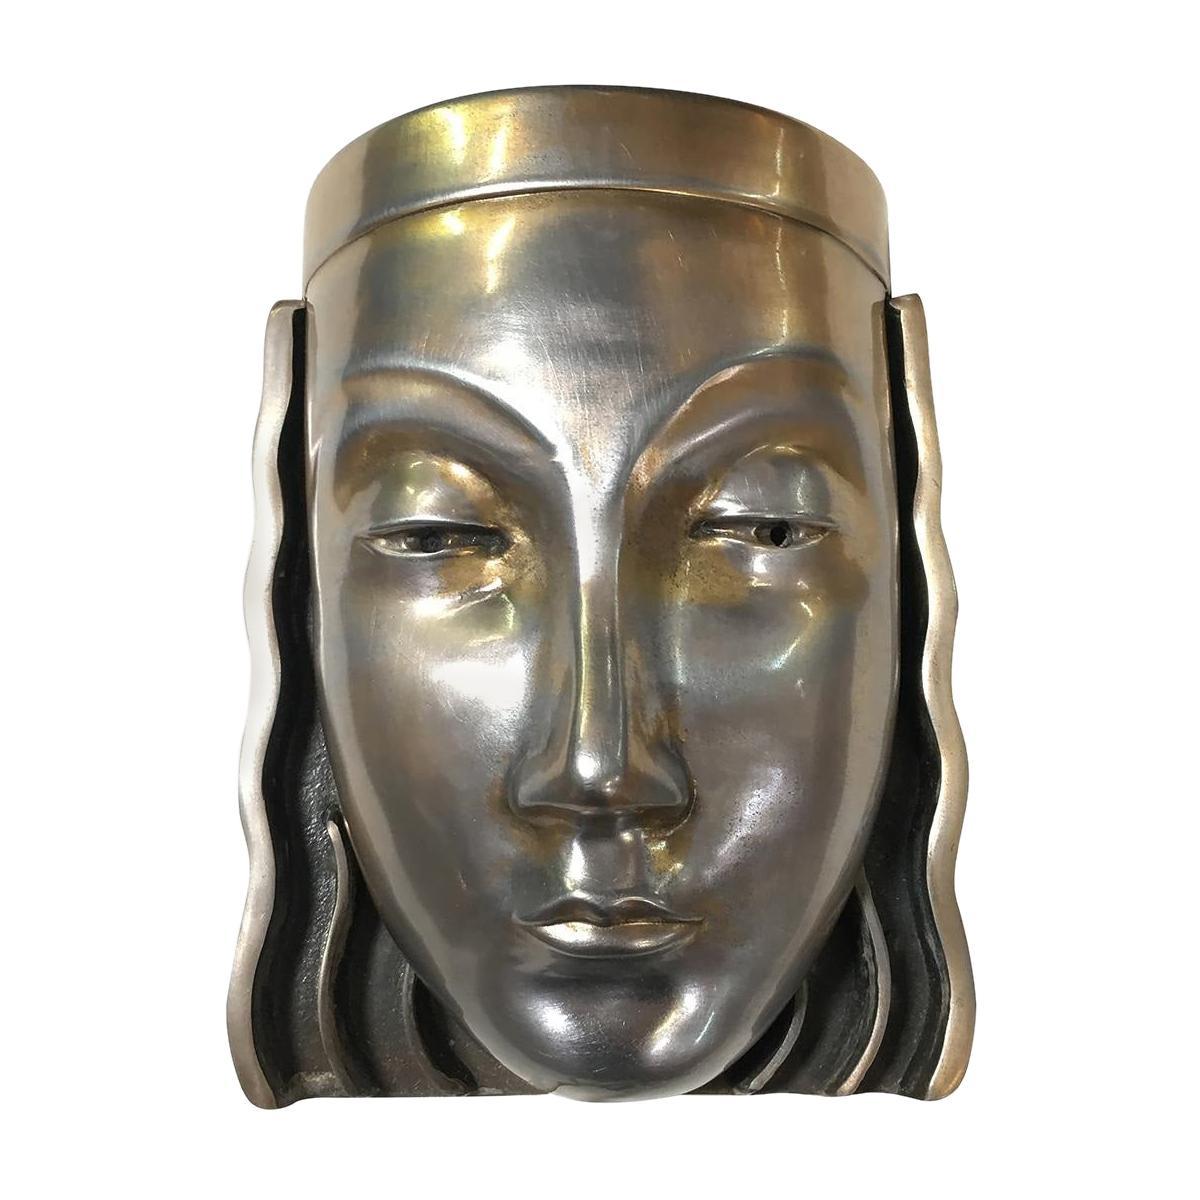 Art Deco Revival Female Face Mask Wall Sconce, Pair